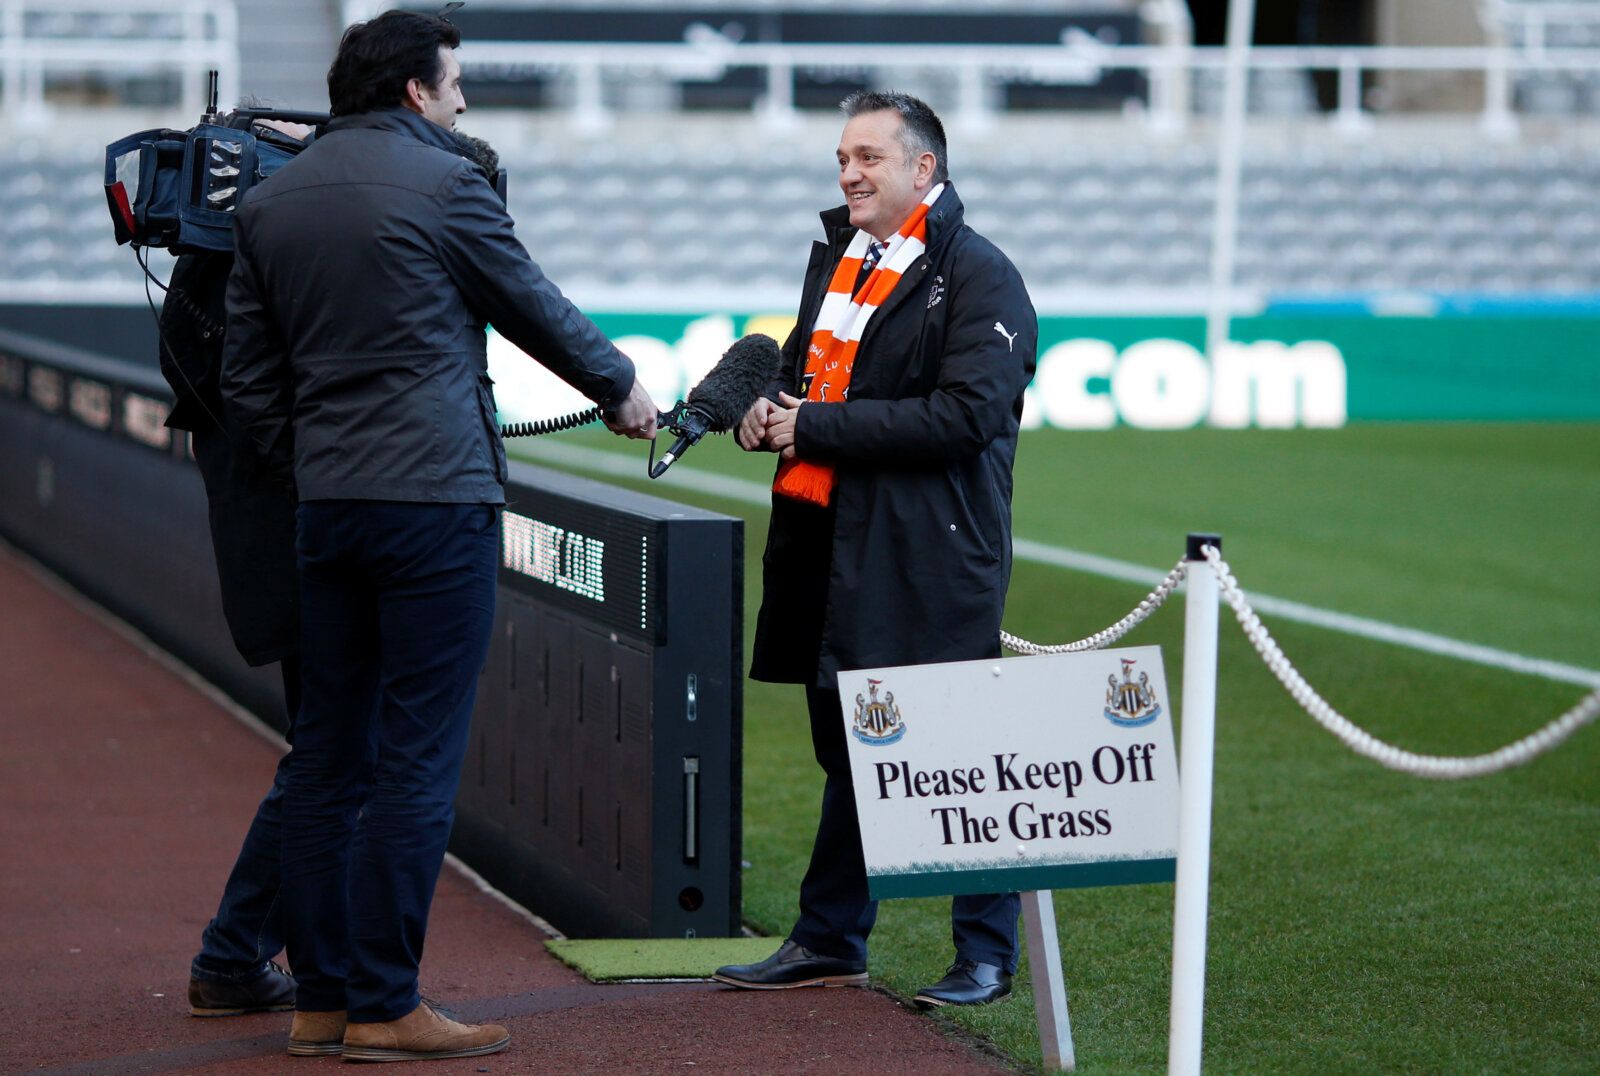 Soccer Football - FA Cup Third Round - Newcastle United vs Luton Town - St James' Park, Newcastle, Britain - January 6, 2018   Luton Town chief executive Gary Sweet before the game   Action Images via Reuters/Ed Sykes